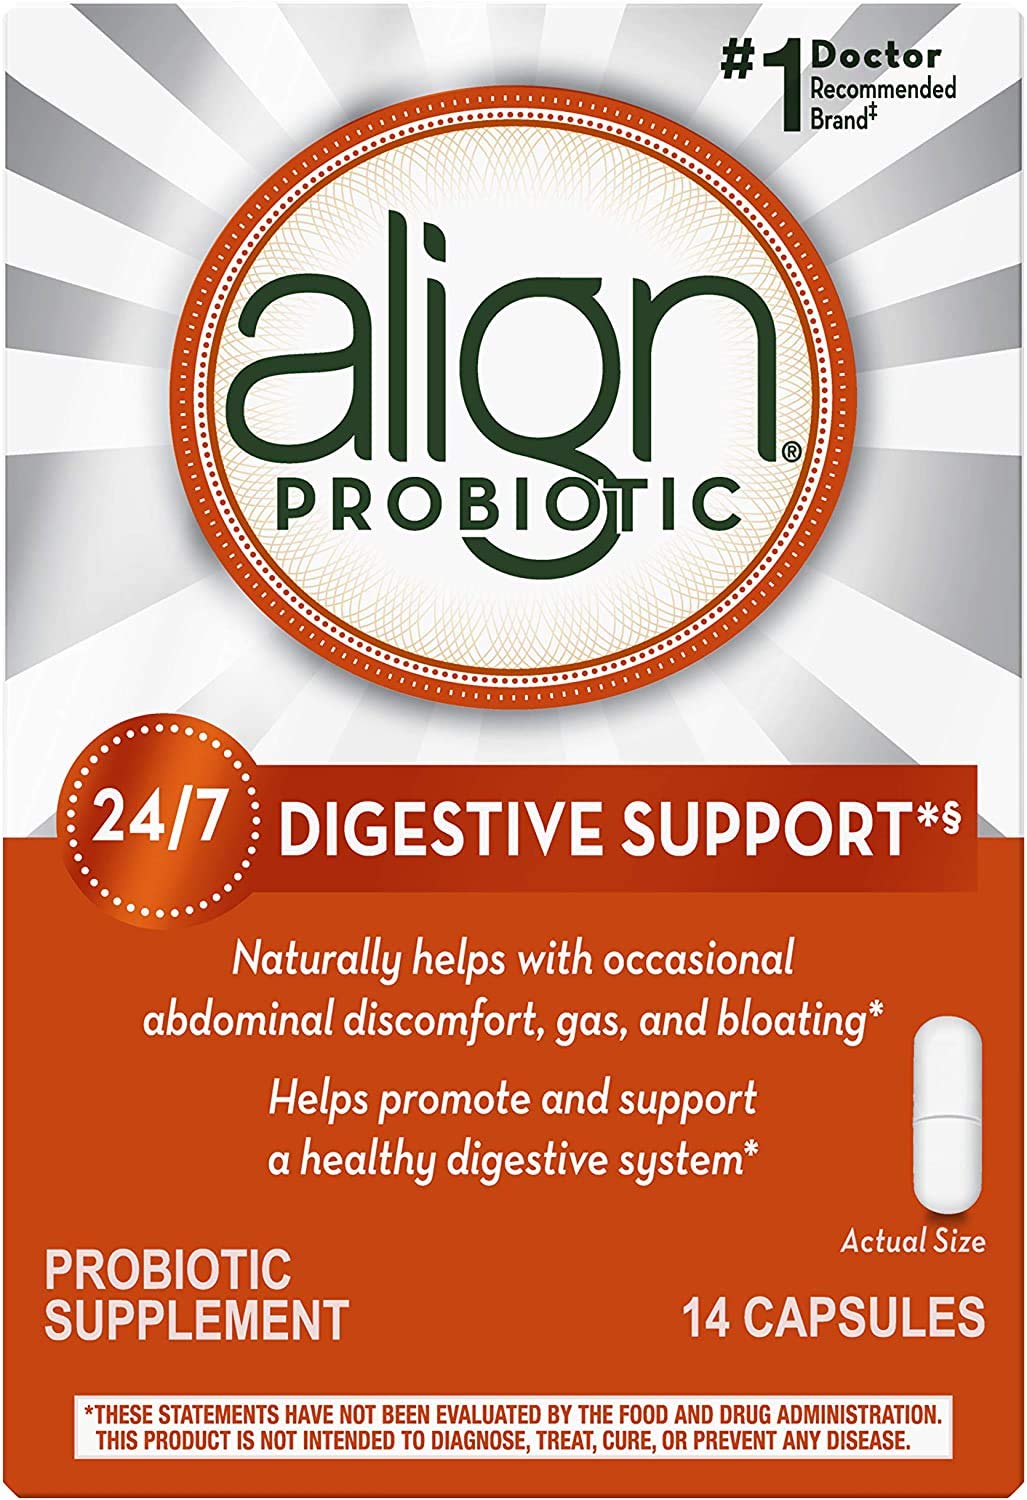 Align Probiotic, Probiotics for Women and Men, Daily Probiotic Supplement for Digestive Health*, #1 Recommended Probiotic by Doctors and Gastroenterologists, 14 Capsules